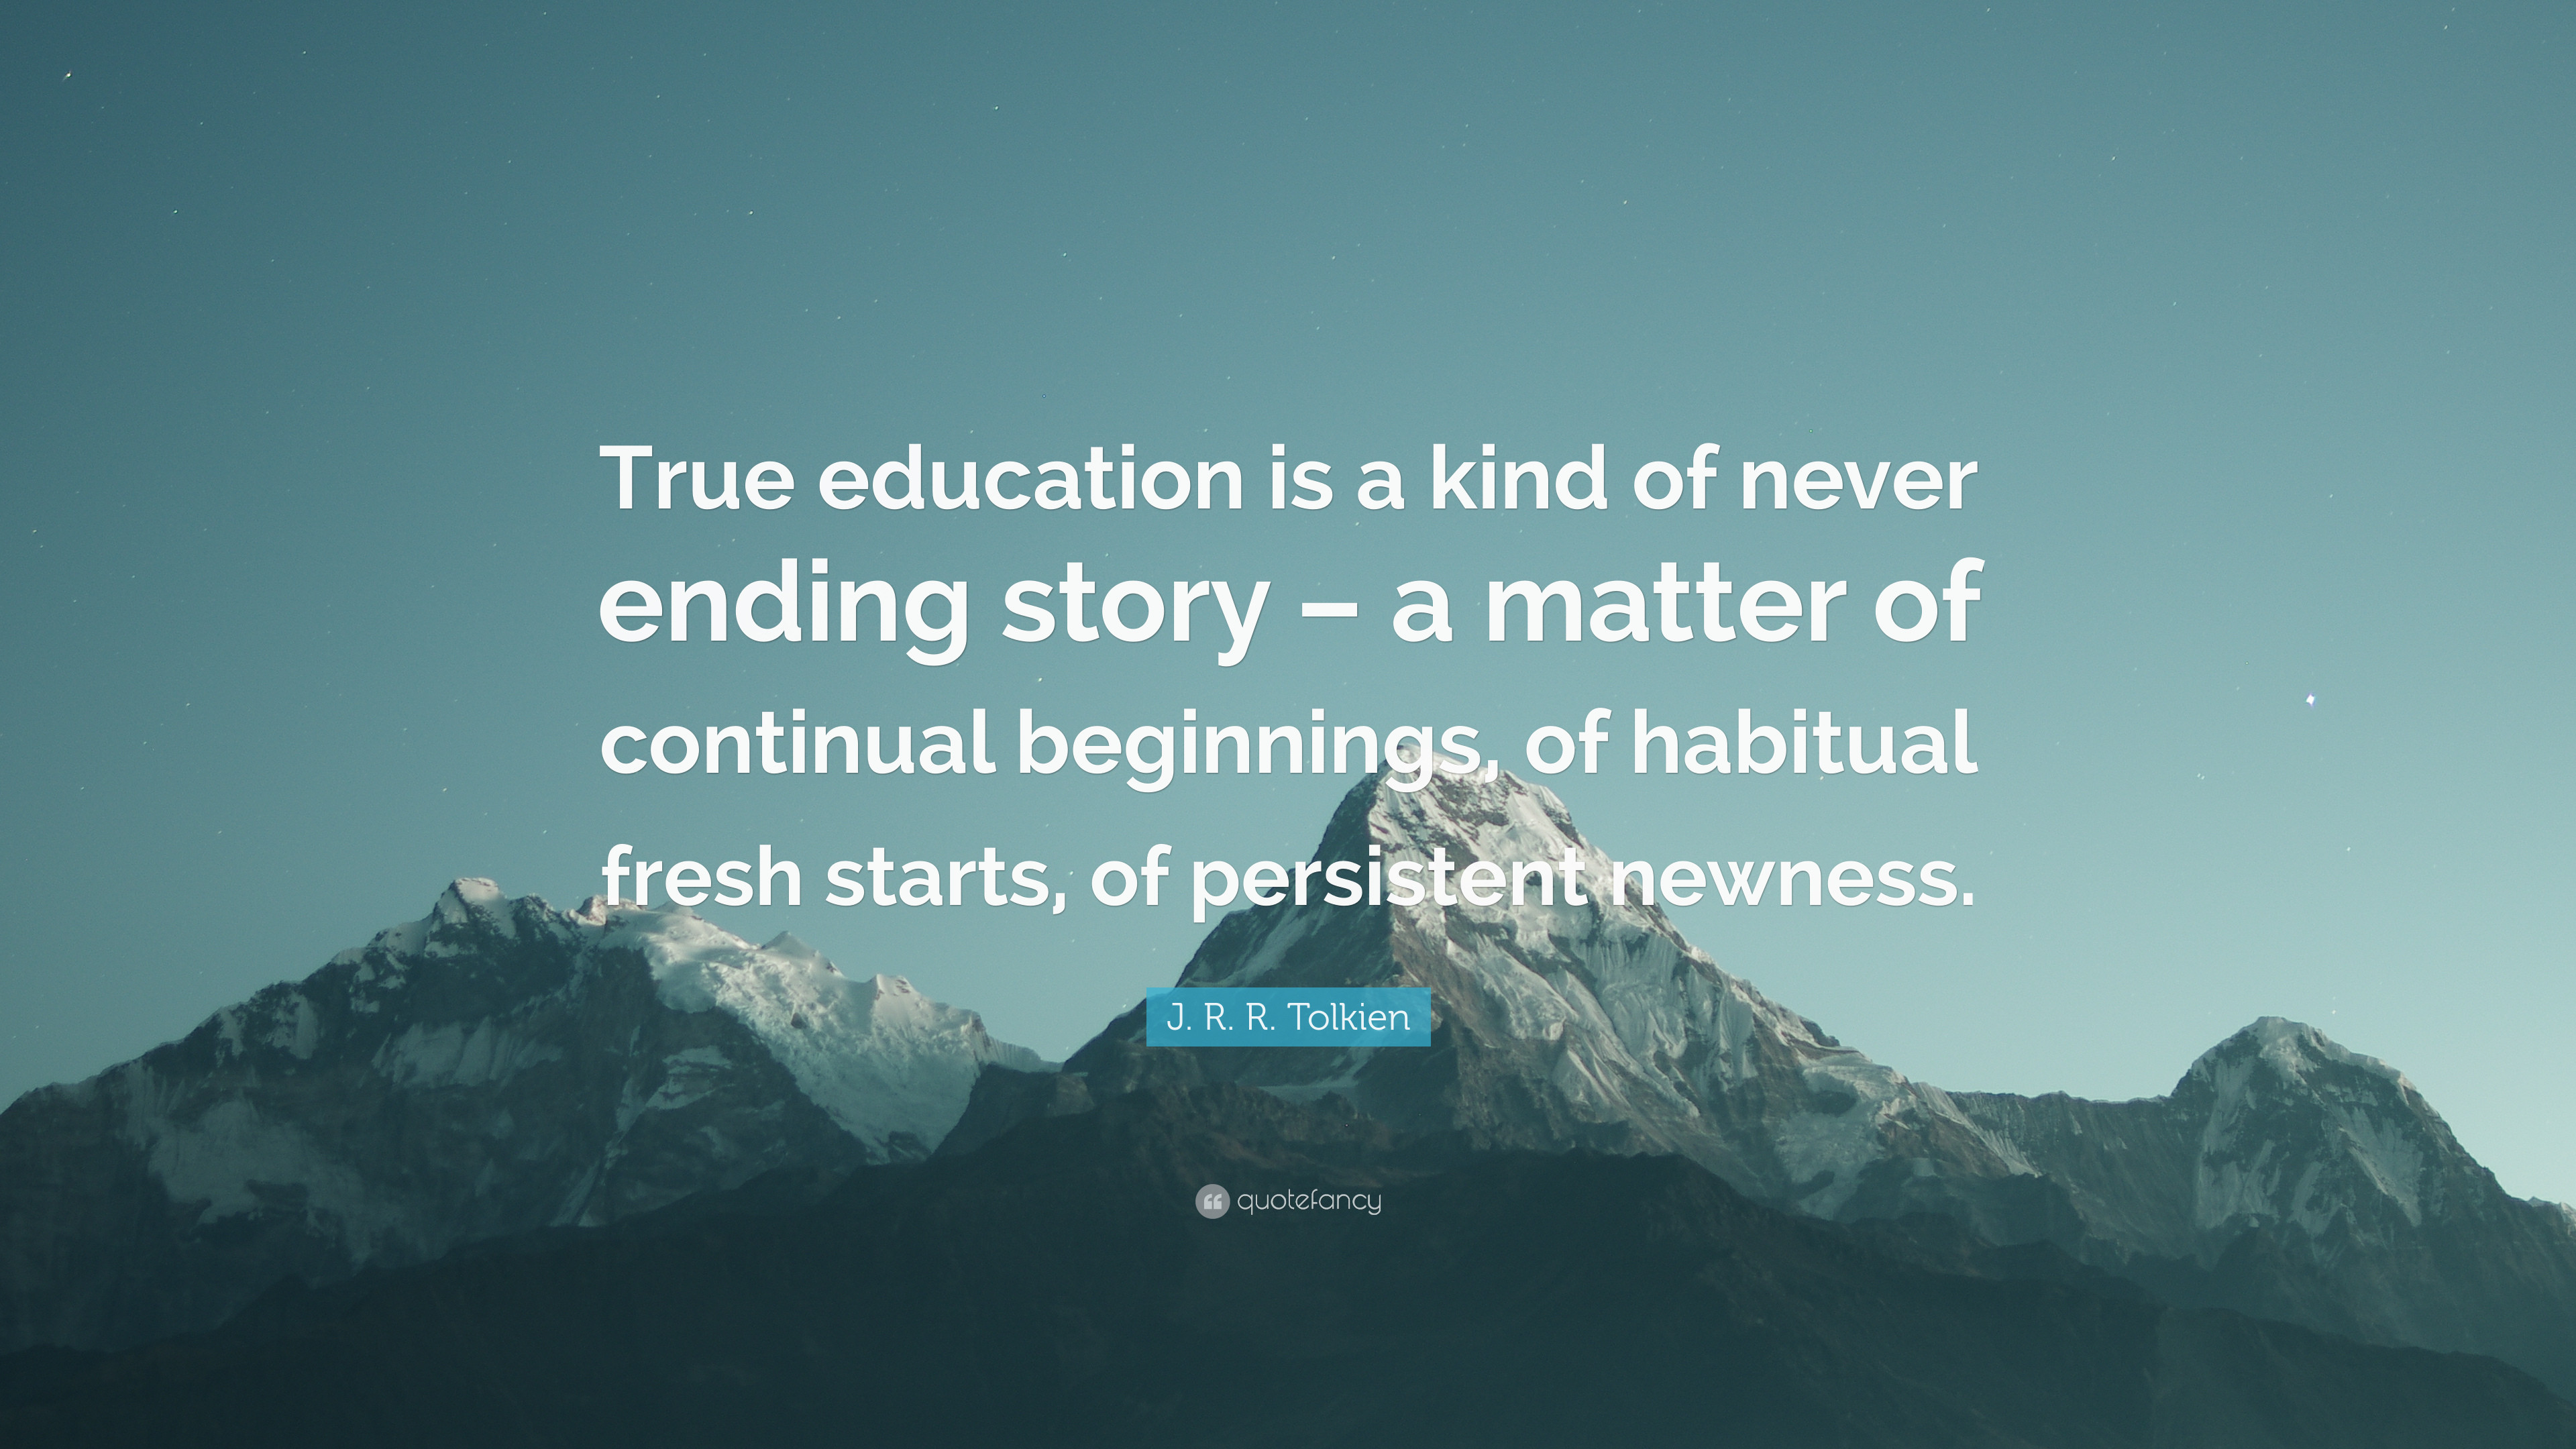 3840x2160 J. R. R. Tolkien Quote: “True education is a kind of never ending story – a